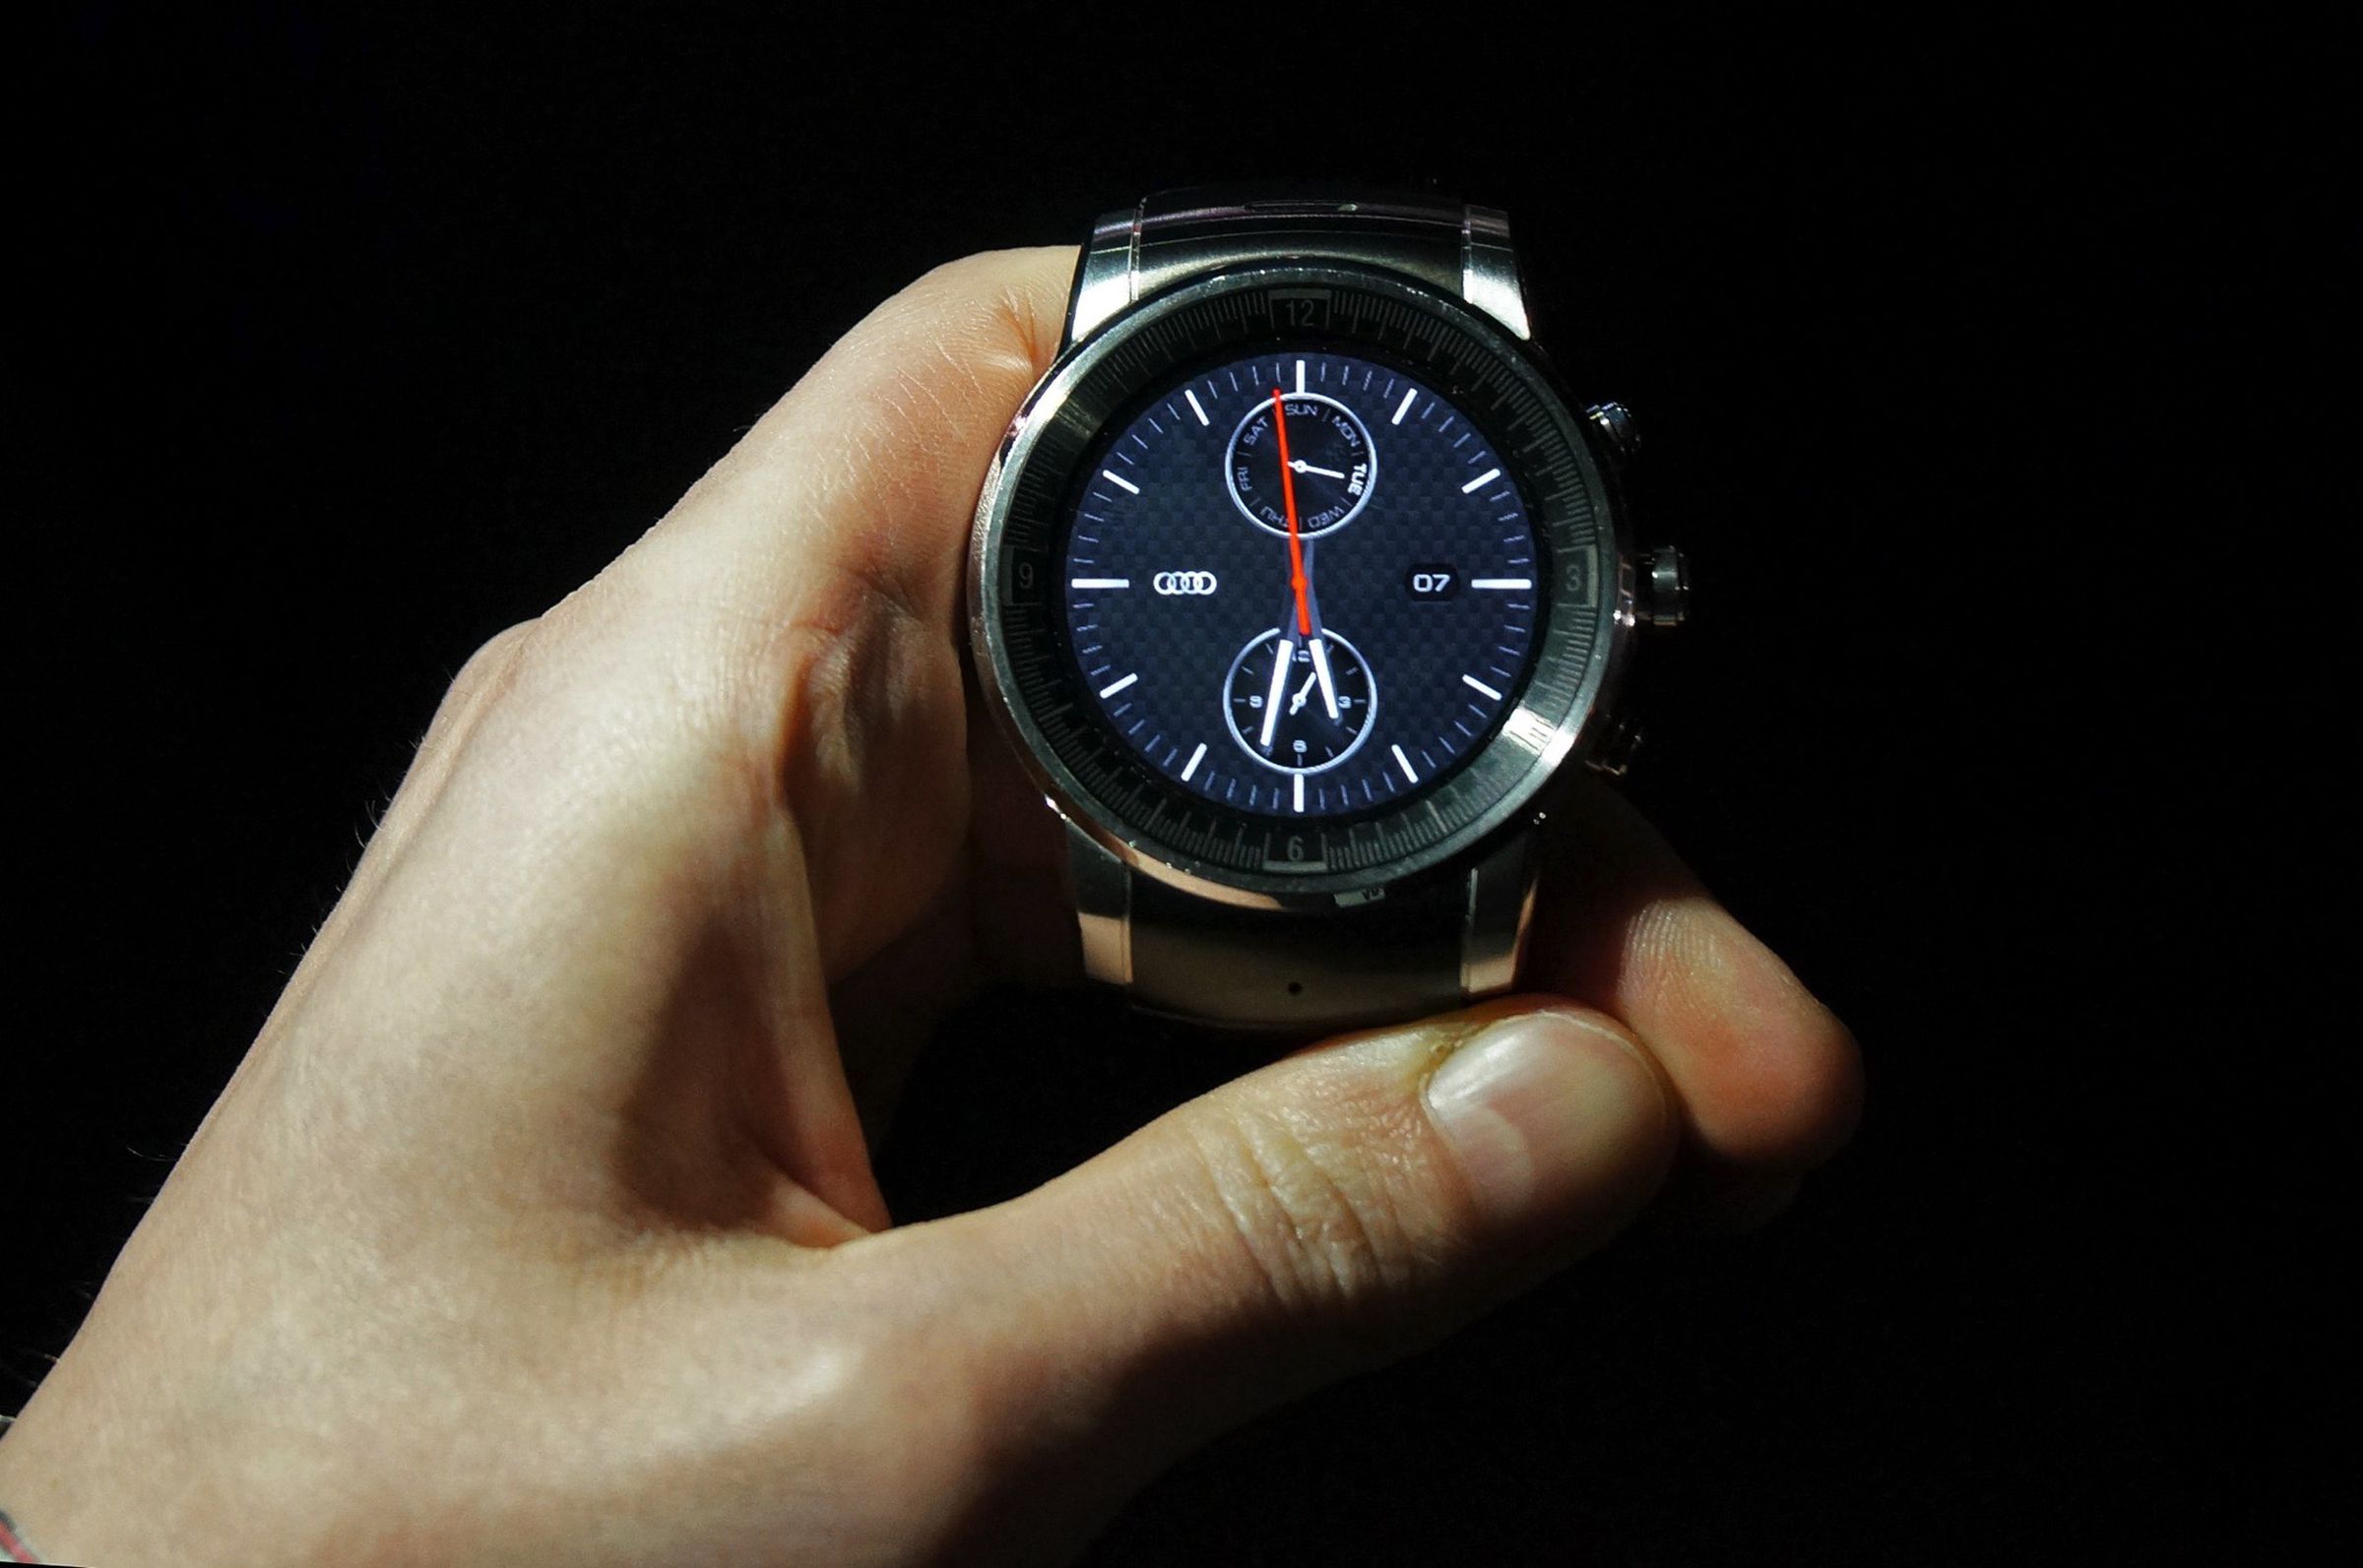 LG's webOS smartwatch for Audi